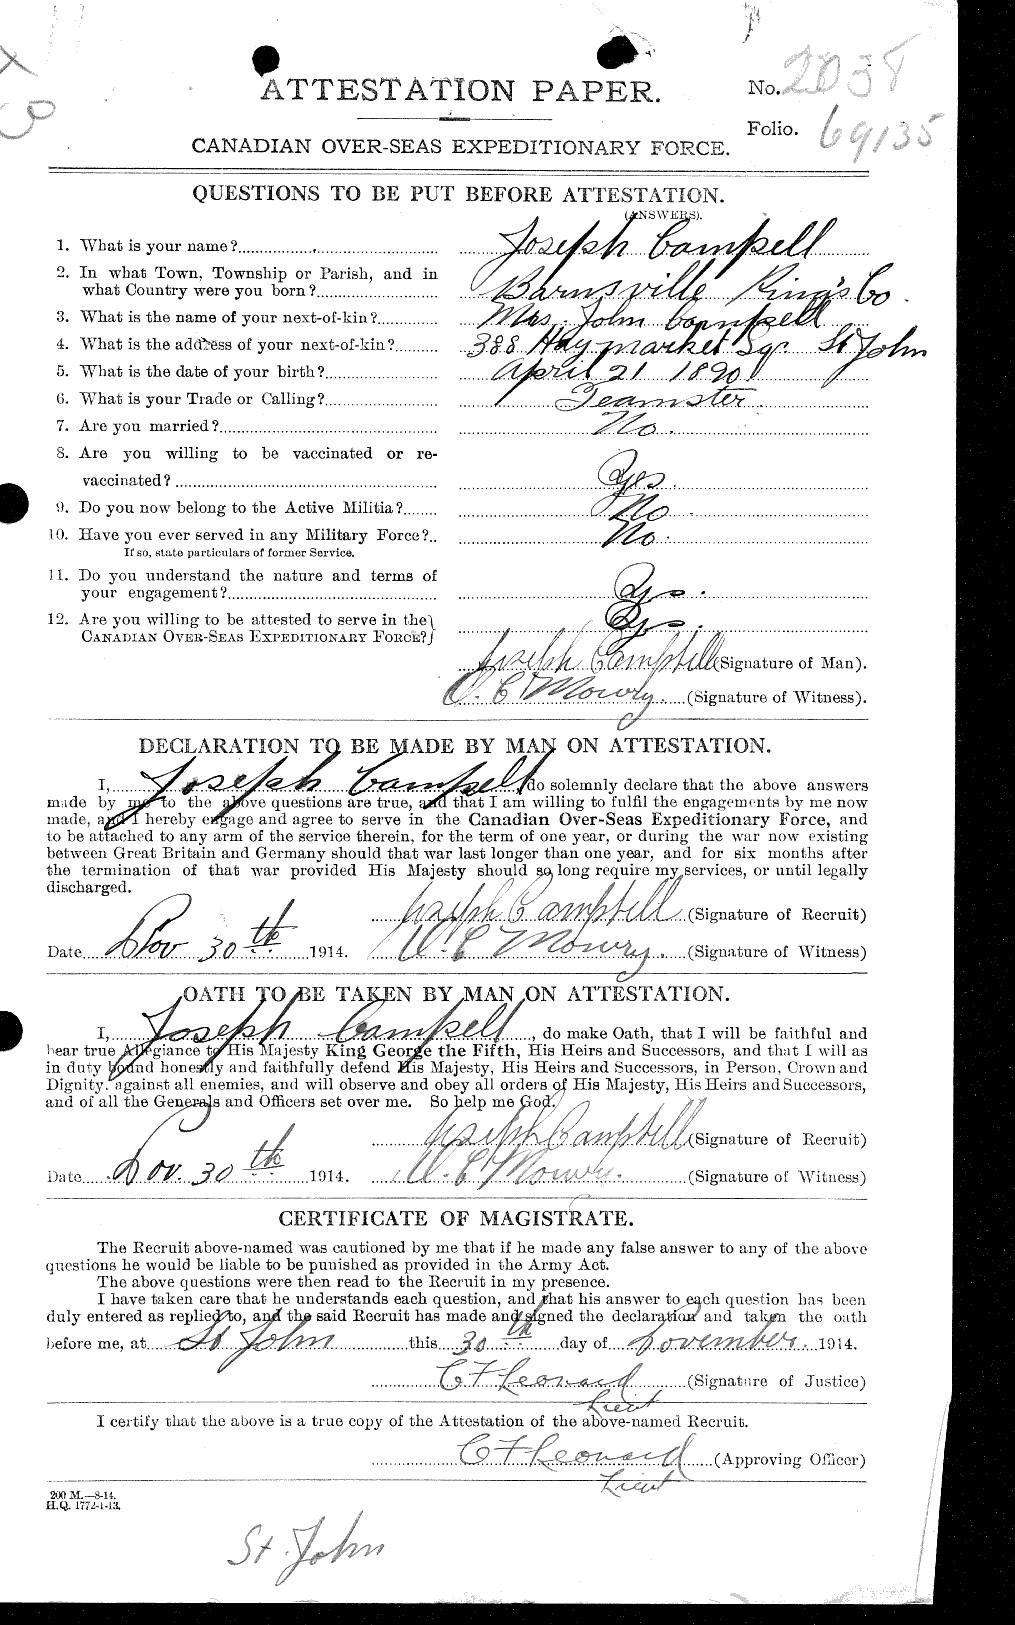 Personnel Records of the First World War - CEF 004964a